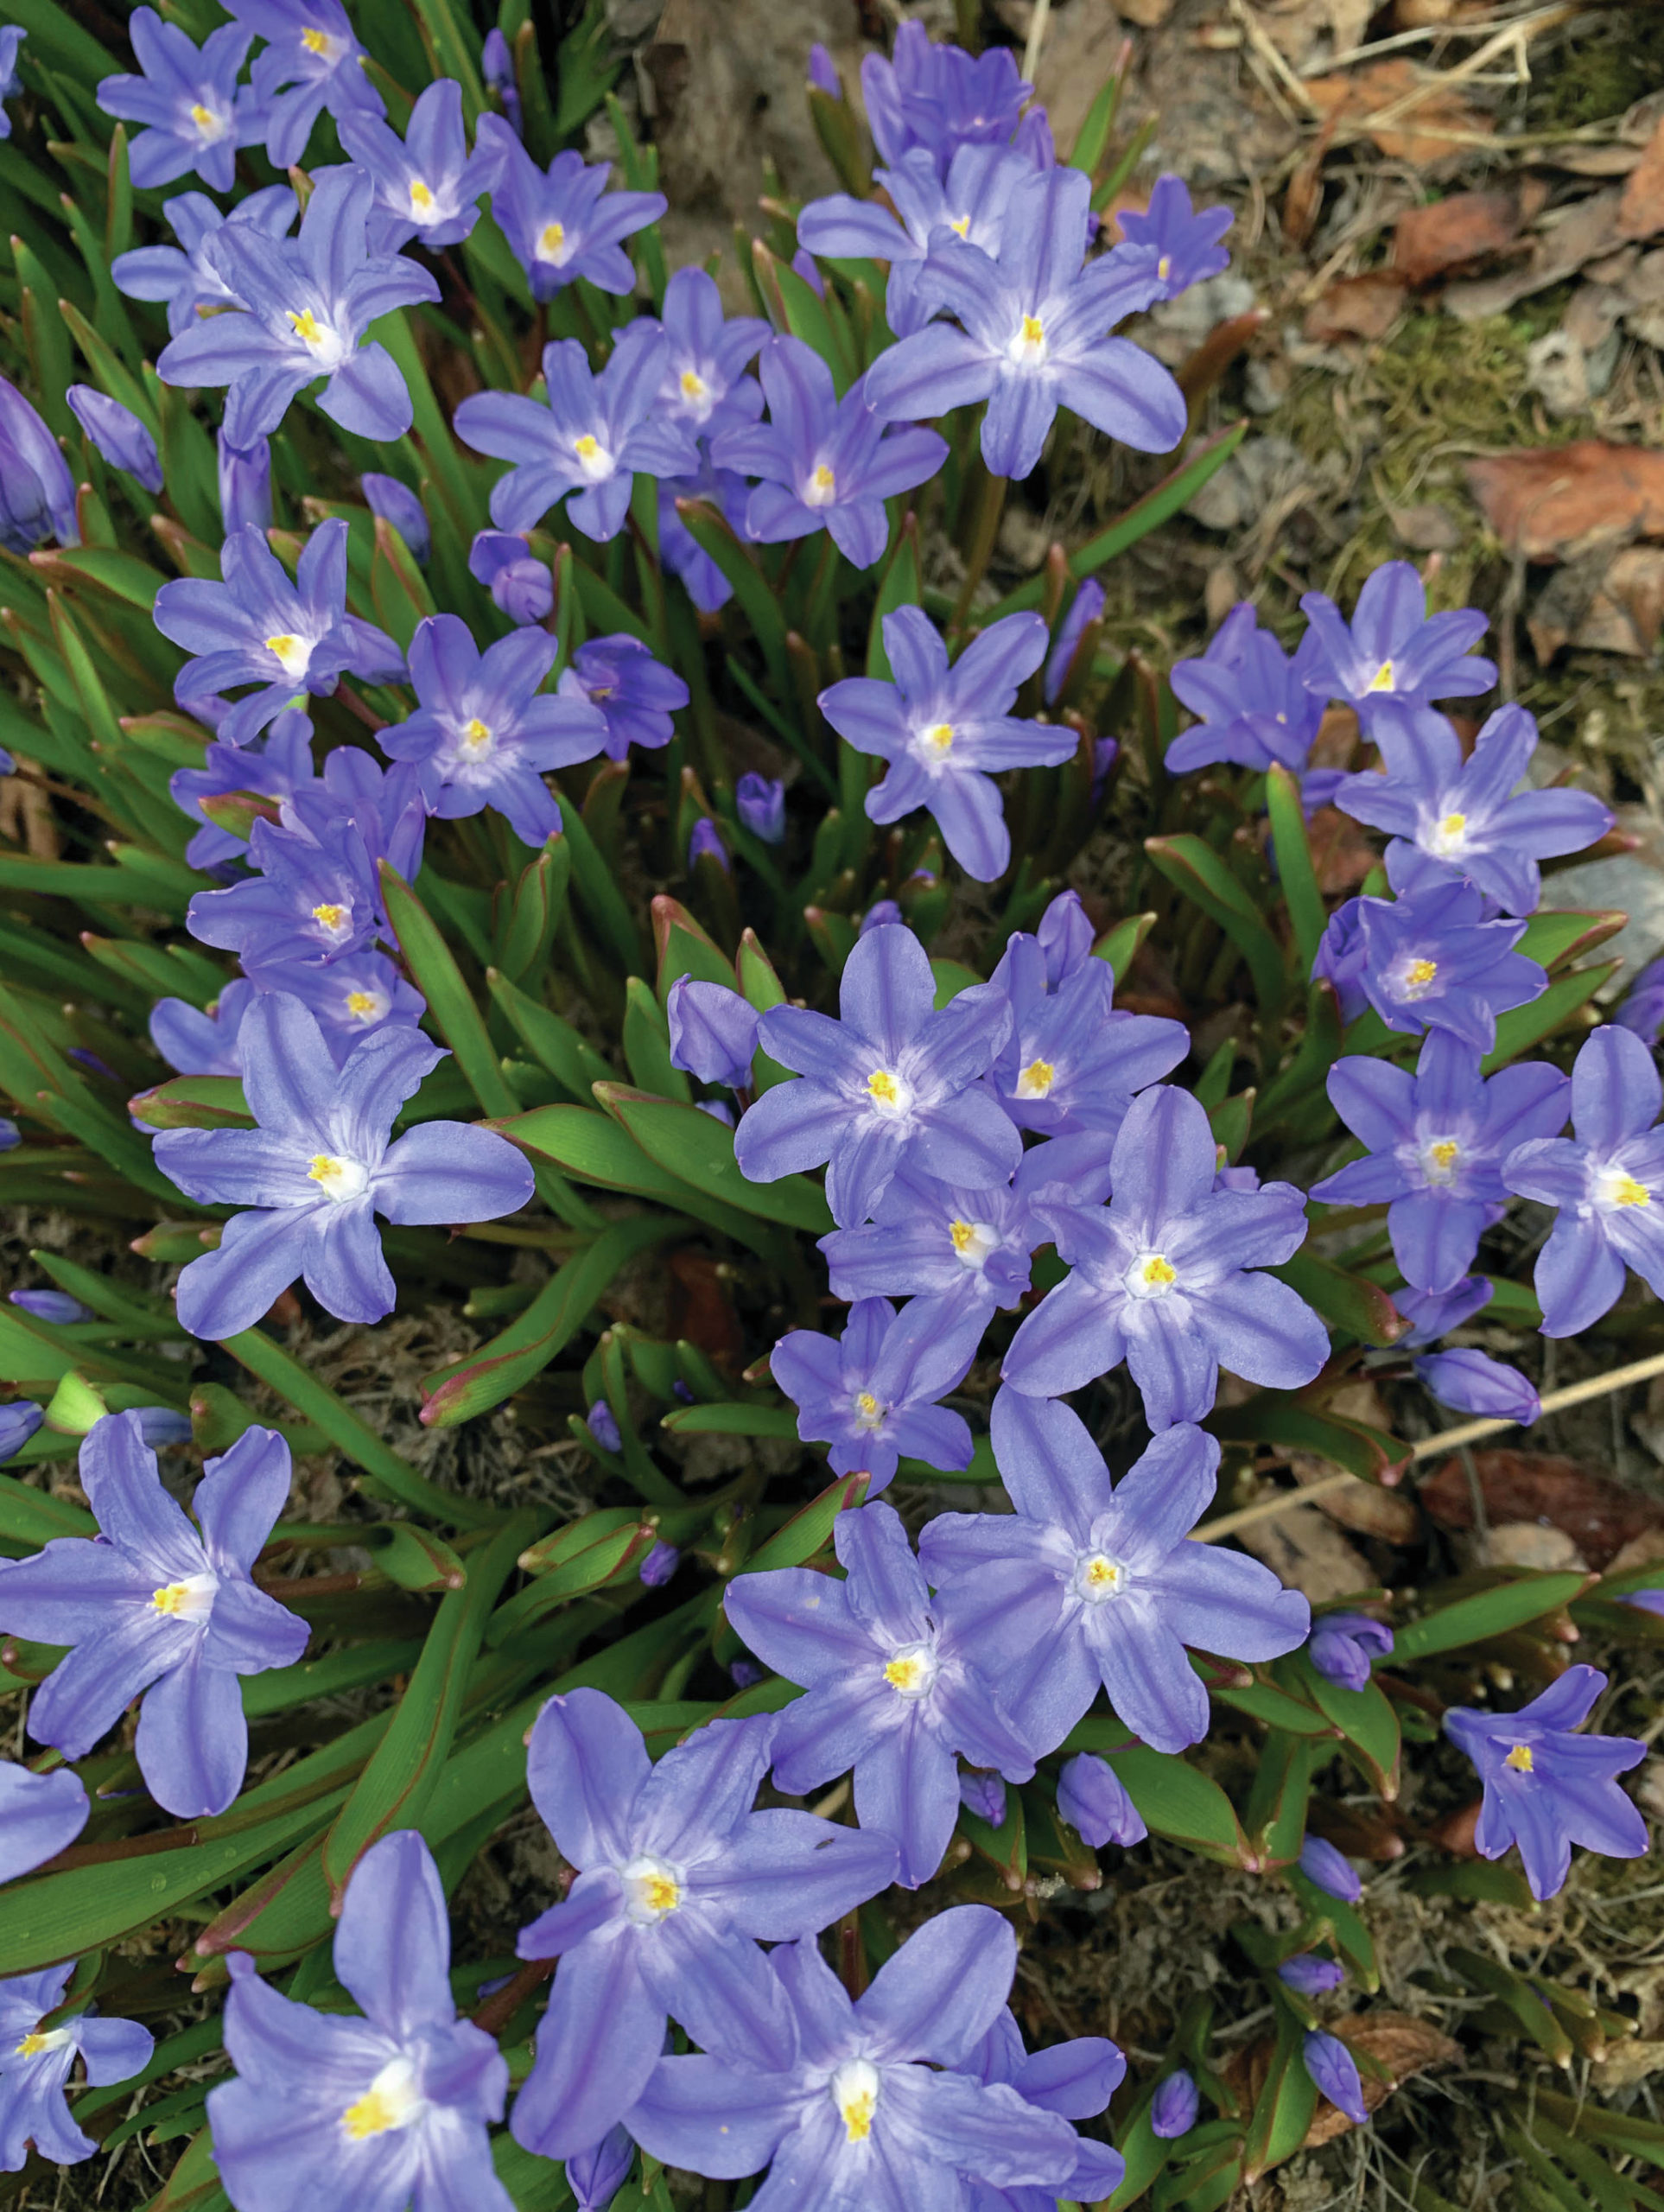 Chionodoxa is a reliable and early minor bulb, as seen here in the Kachemak Gardener’s garden on May 9, 2021, in Homer, Alaska. (Photo by Rosemary Fitzpatrick)